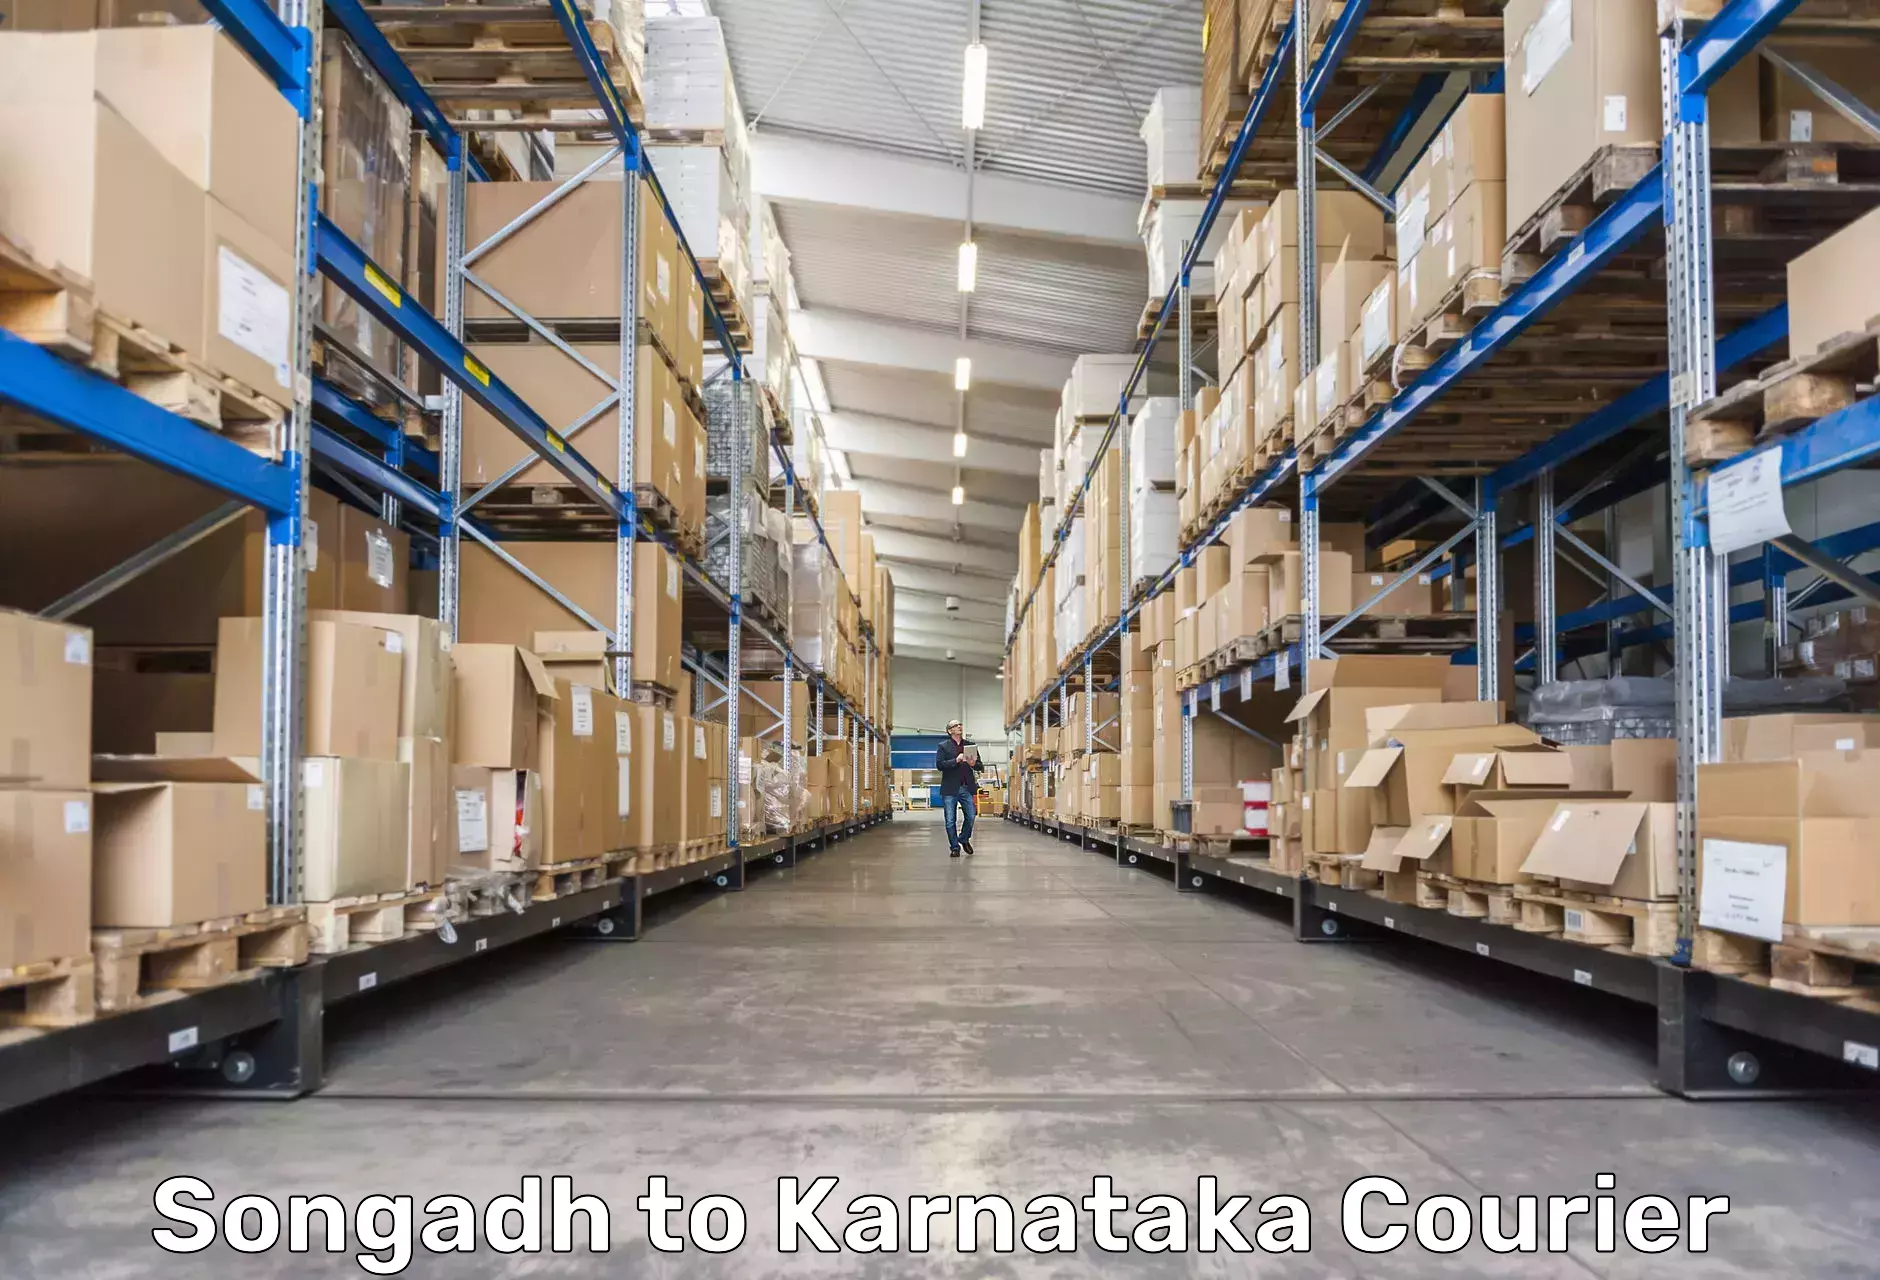 Round-the-clock parcel delivery Songadh to Karnataka